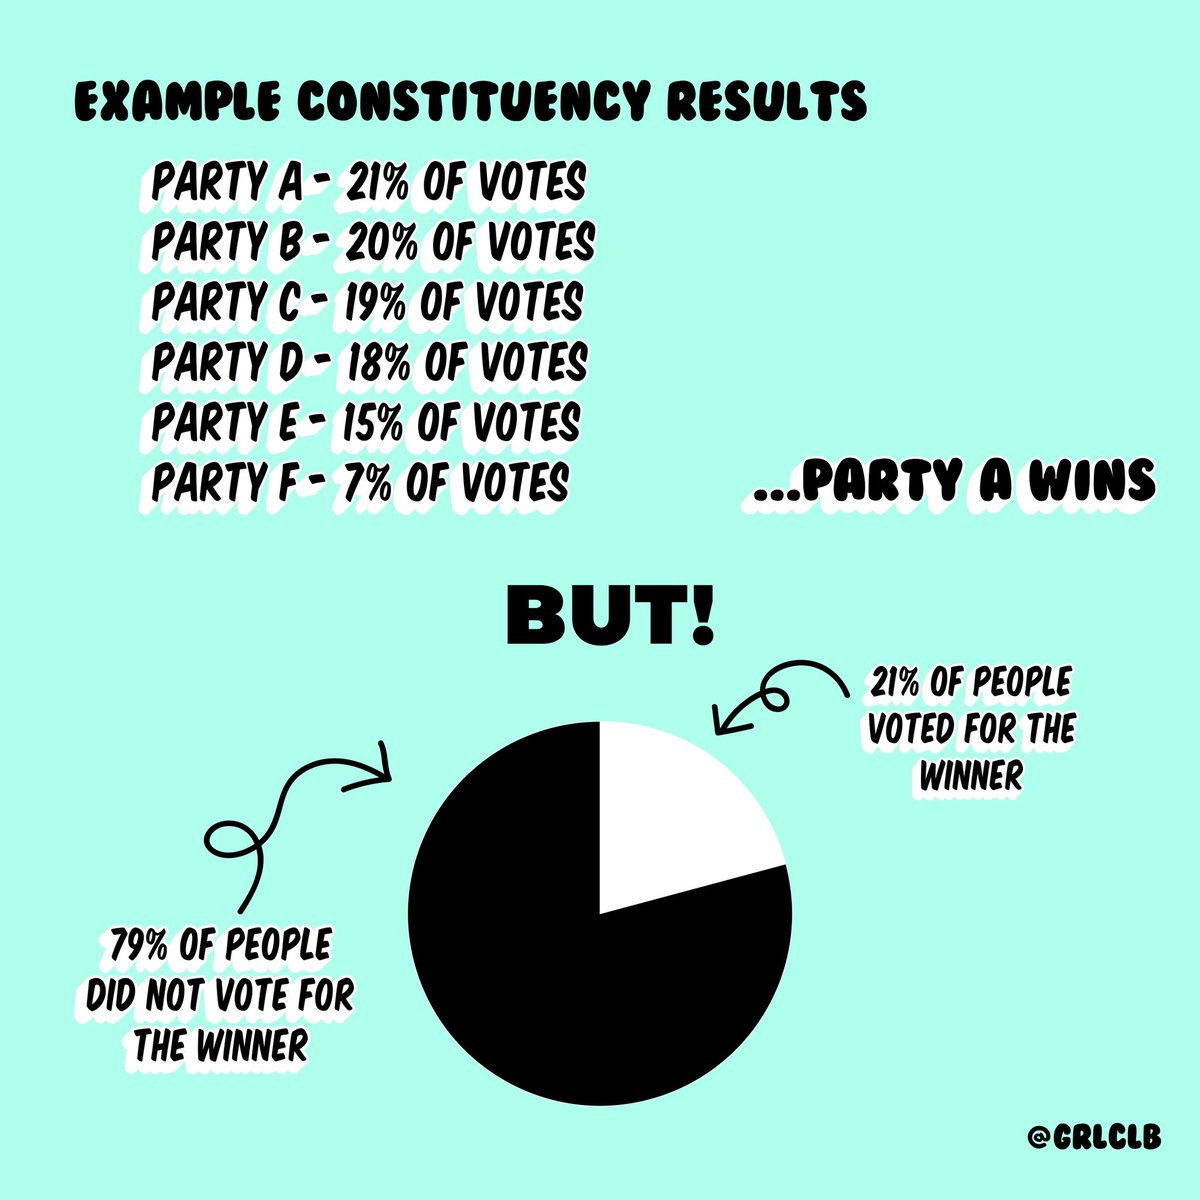 hello I made an infographic thing about the election. it isn’t about who to vote for, just about how an election actually works and where your vote goes. the system is [intentionally] complicated so I thought I’d make it easy. 10 slides so see next 2 tweets for the full thing!